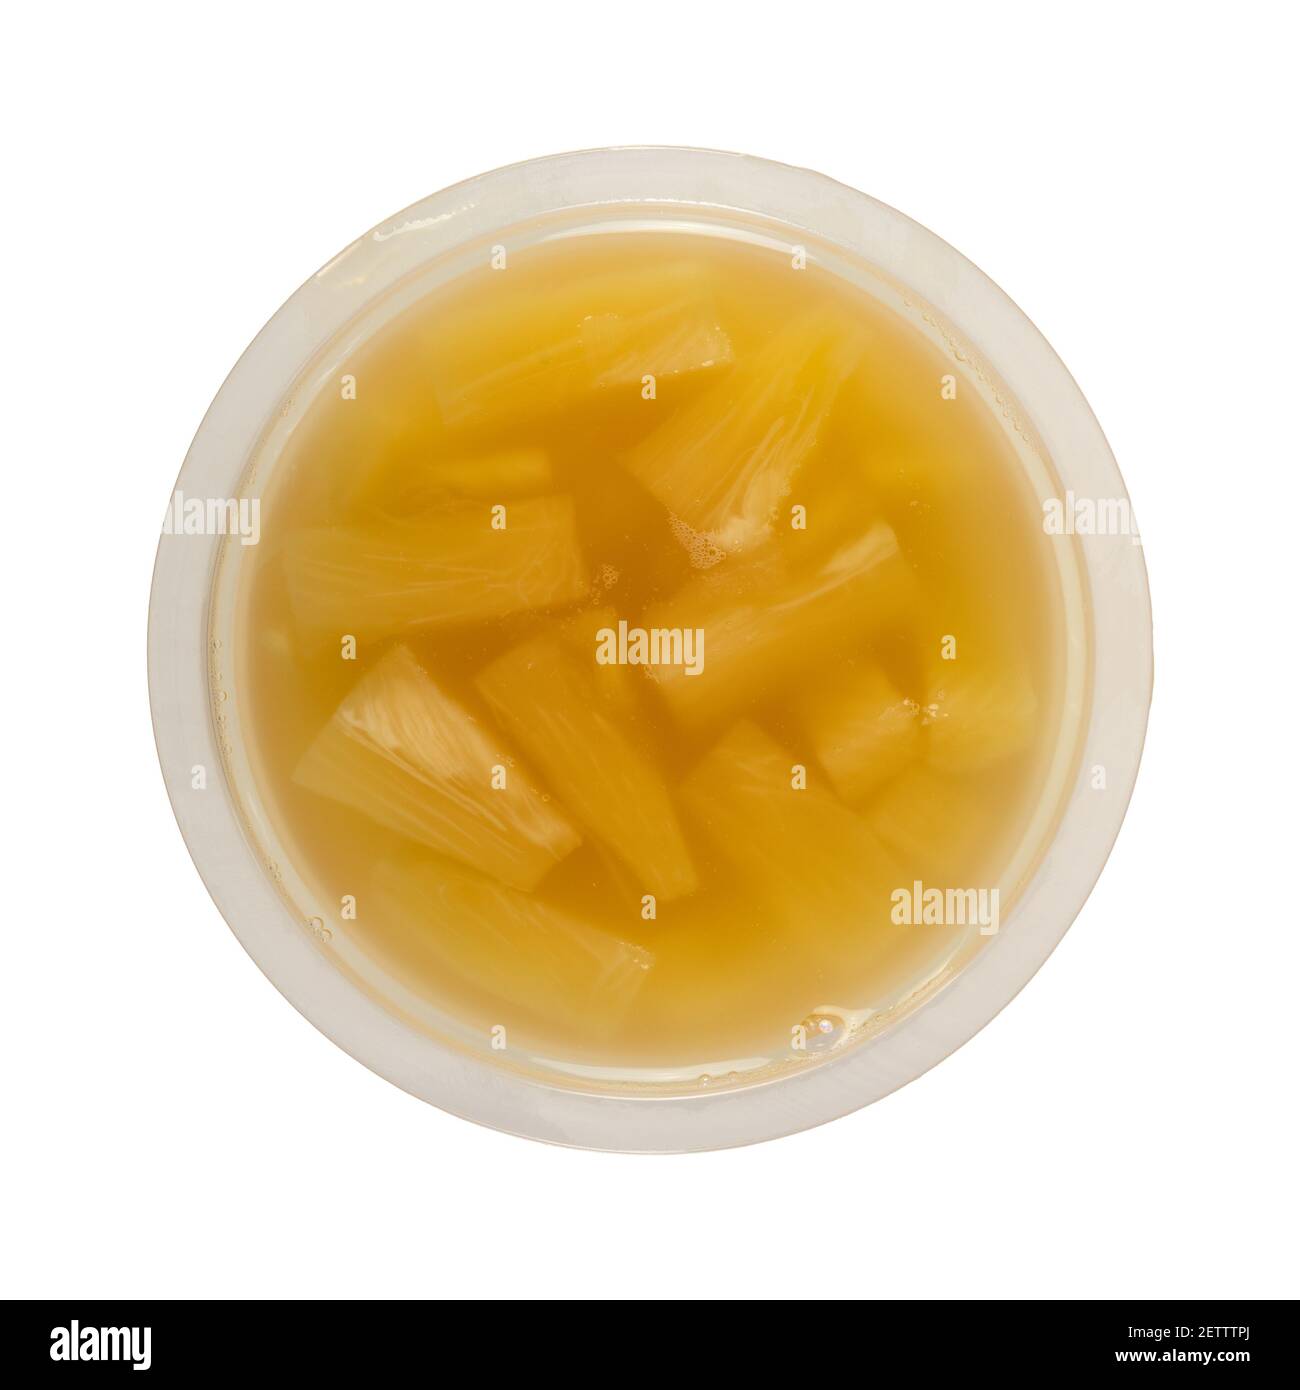 Top view of a plastic container filled with diced pineapple in natural juice isolated on a white background. Stock Photo